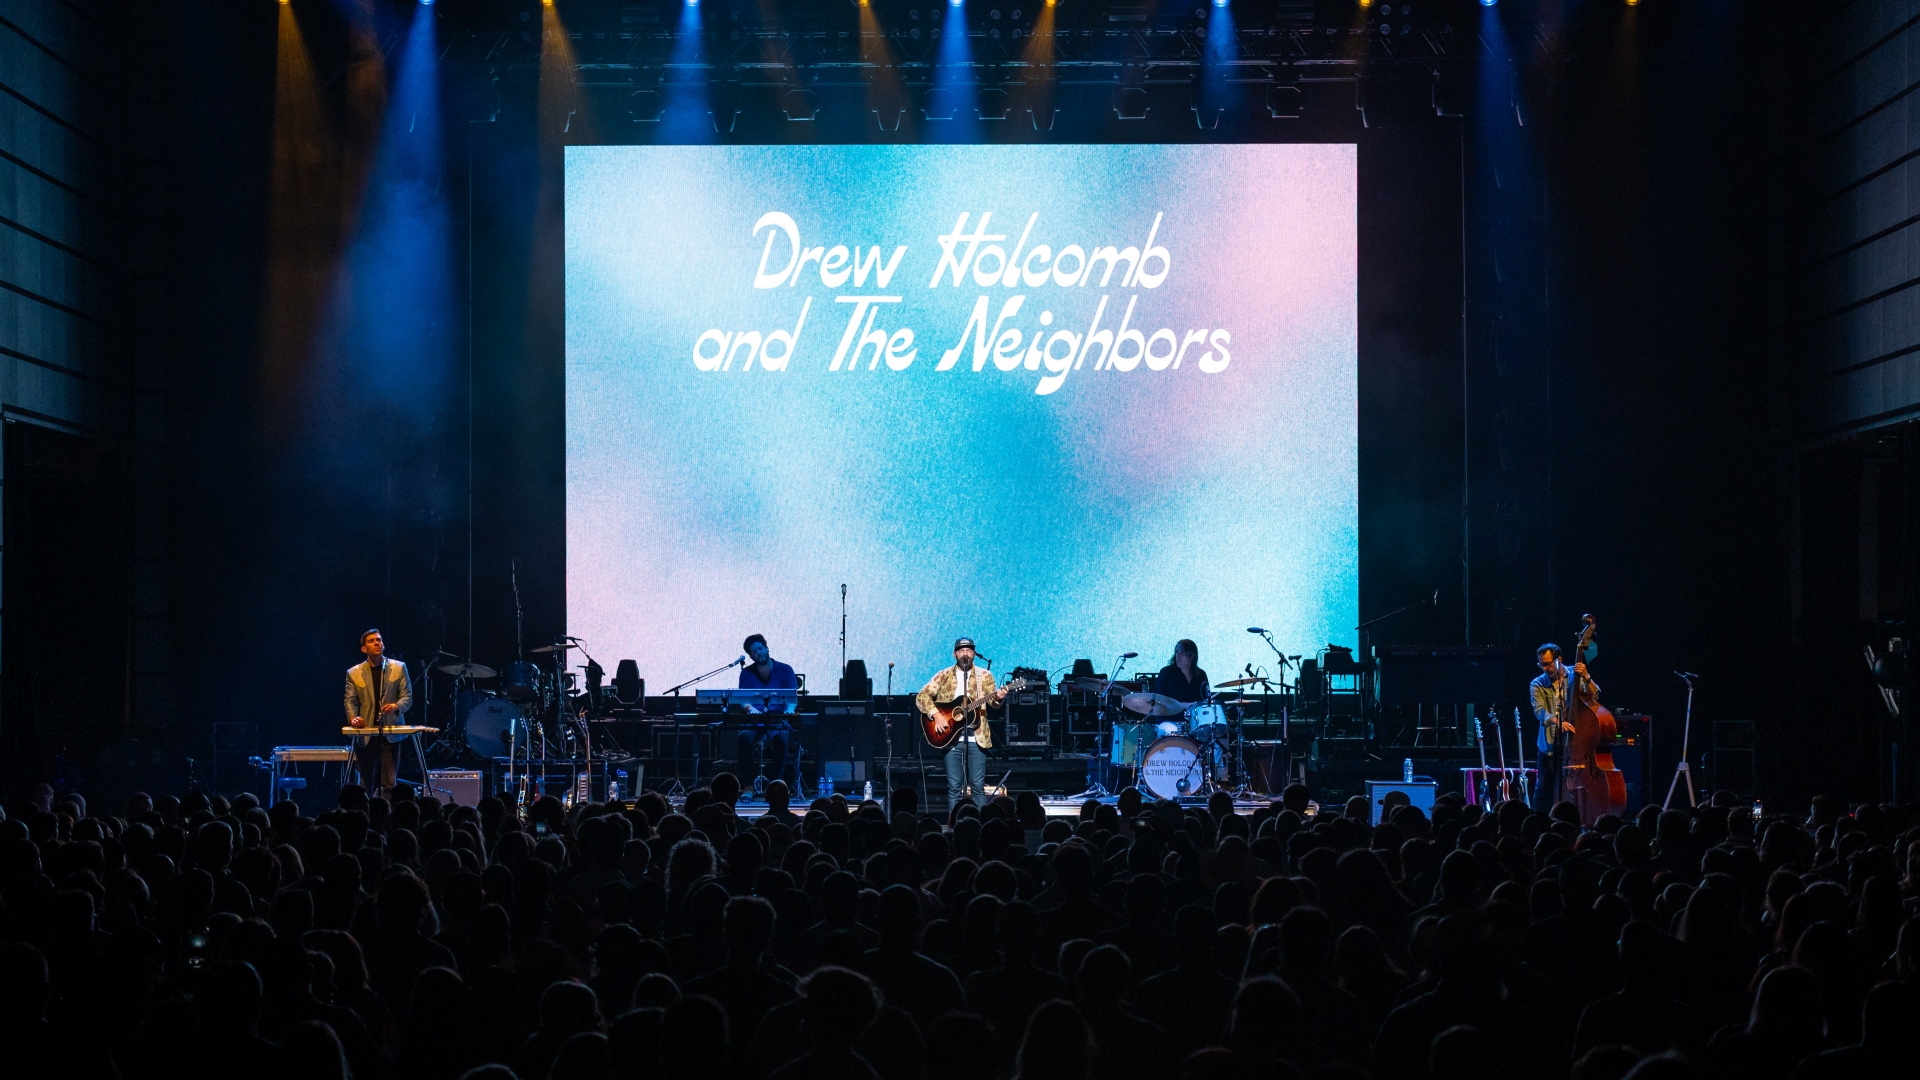 Find Your People - song and lyrics by Drew Holcomb & The Neighbors